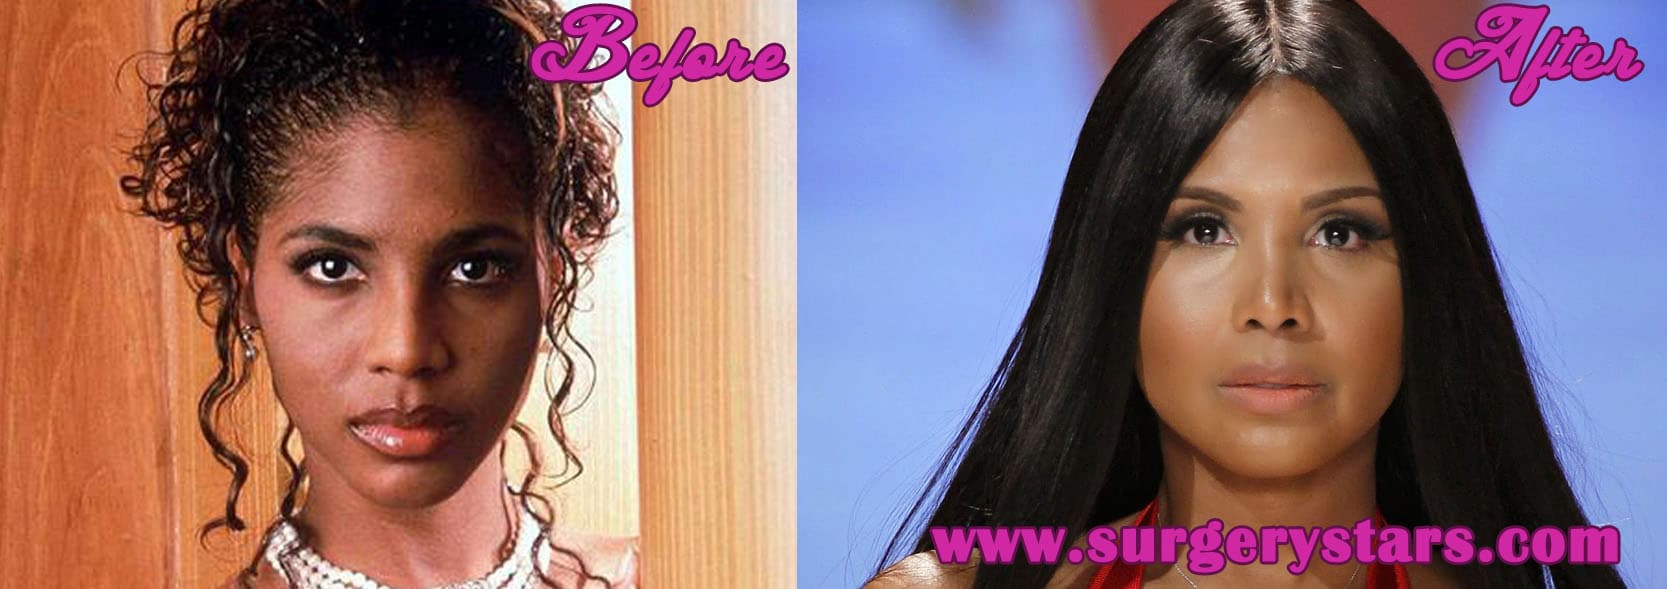 Toni Braxton Plastic Surgery Before And After 1